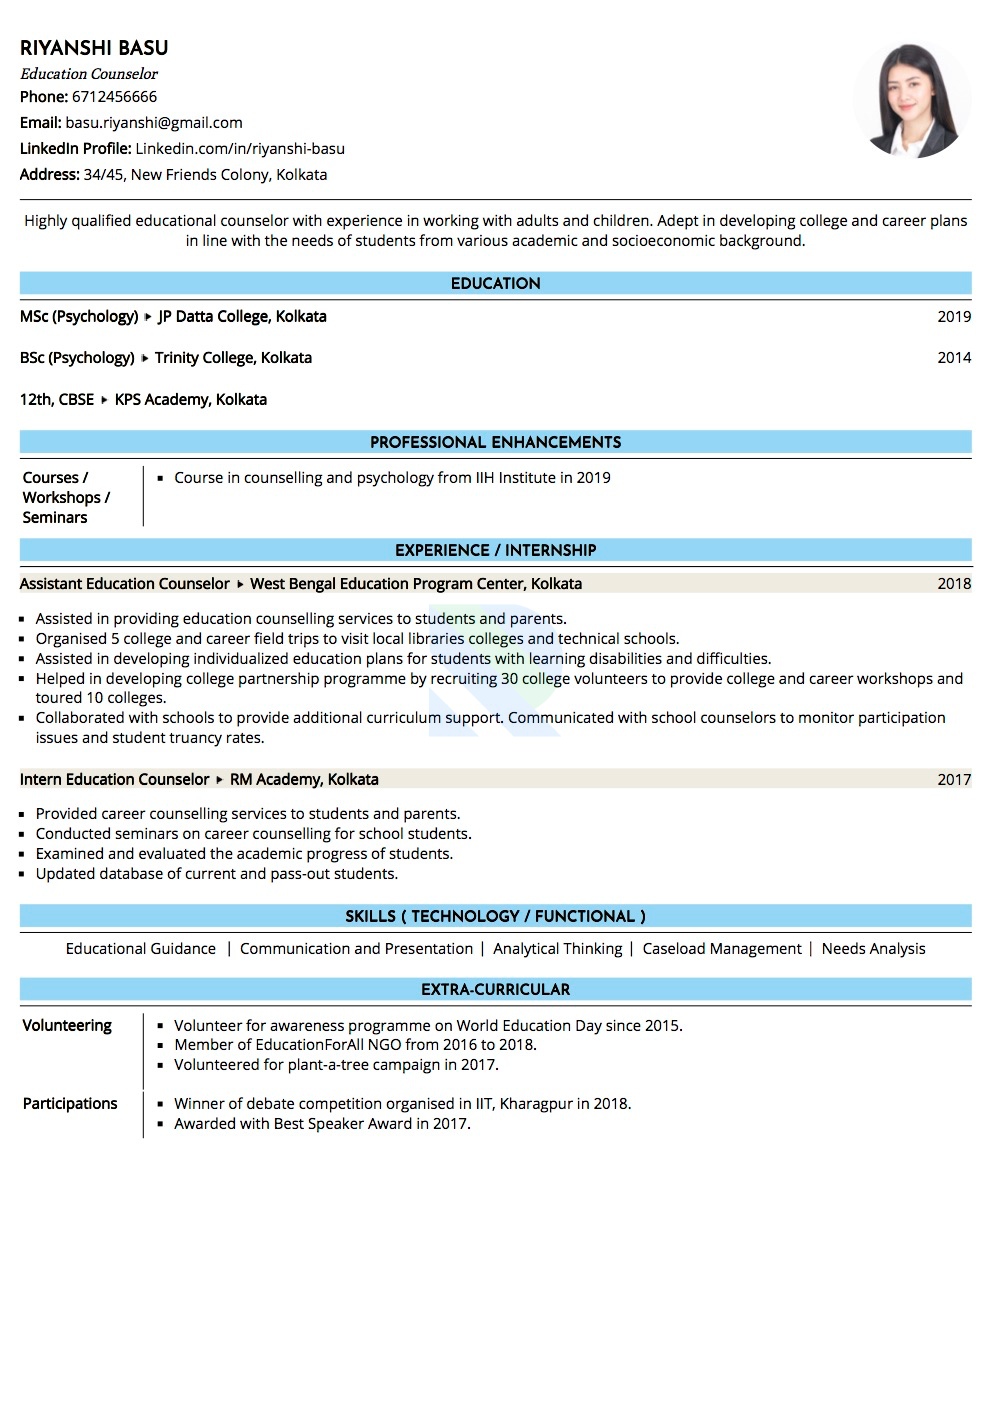 Resume of Education Counselor 